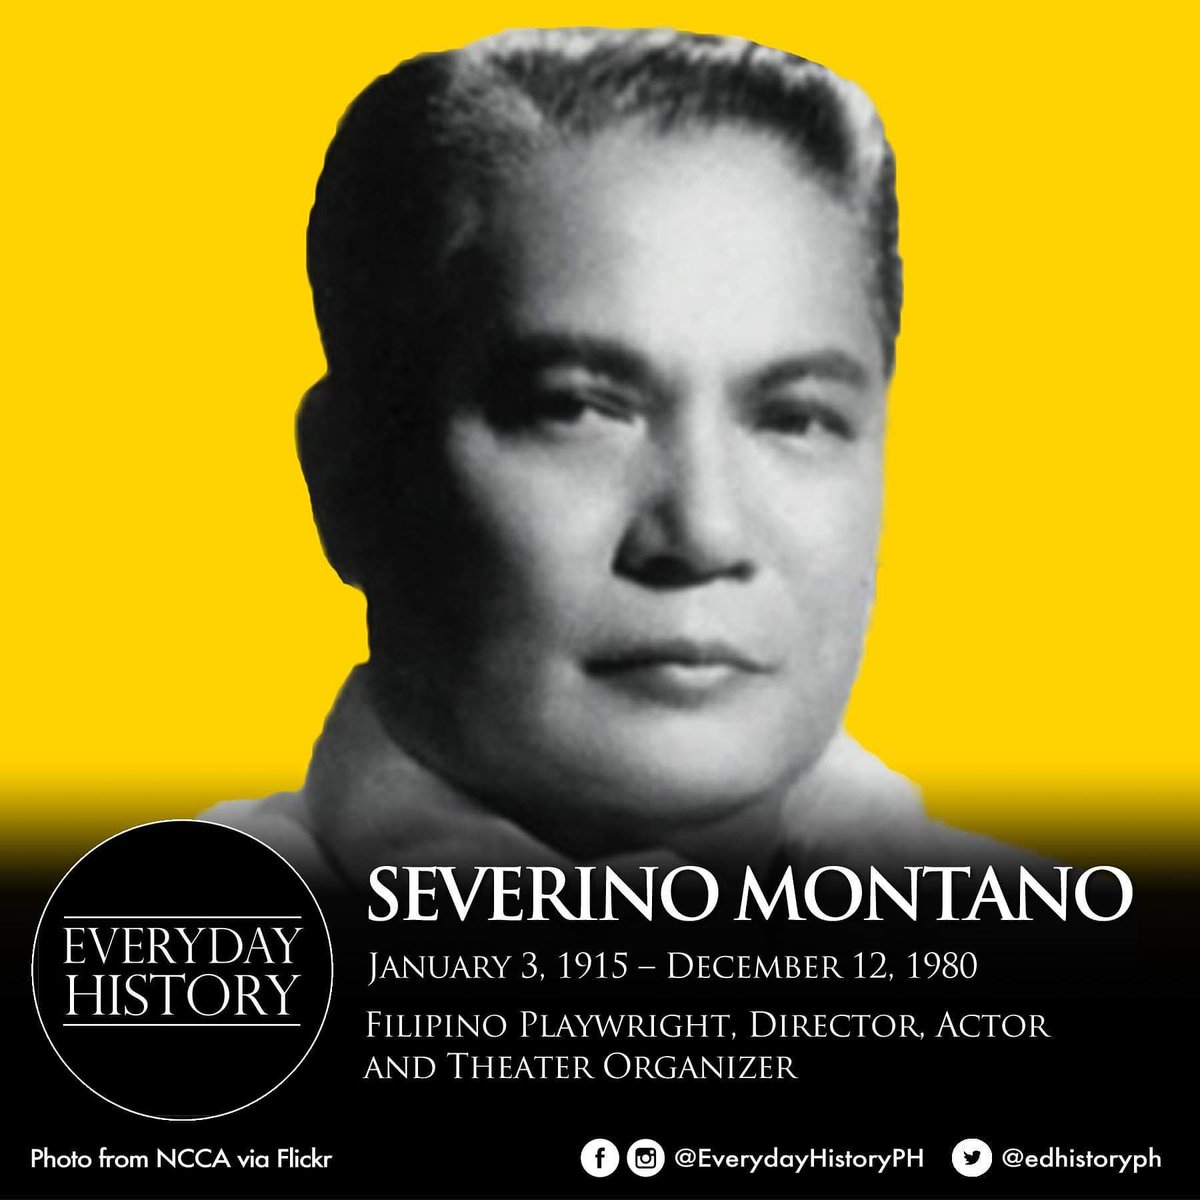 #January3 | On this day in 1915, Filipino playwright, director, actor and theater organizer Severino Montano was born in Laoag, Ilocos Norte. As the Dean of Instruction at the Philippine Normal College, he established a graduate program for training playwrights, directors... 1/2